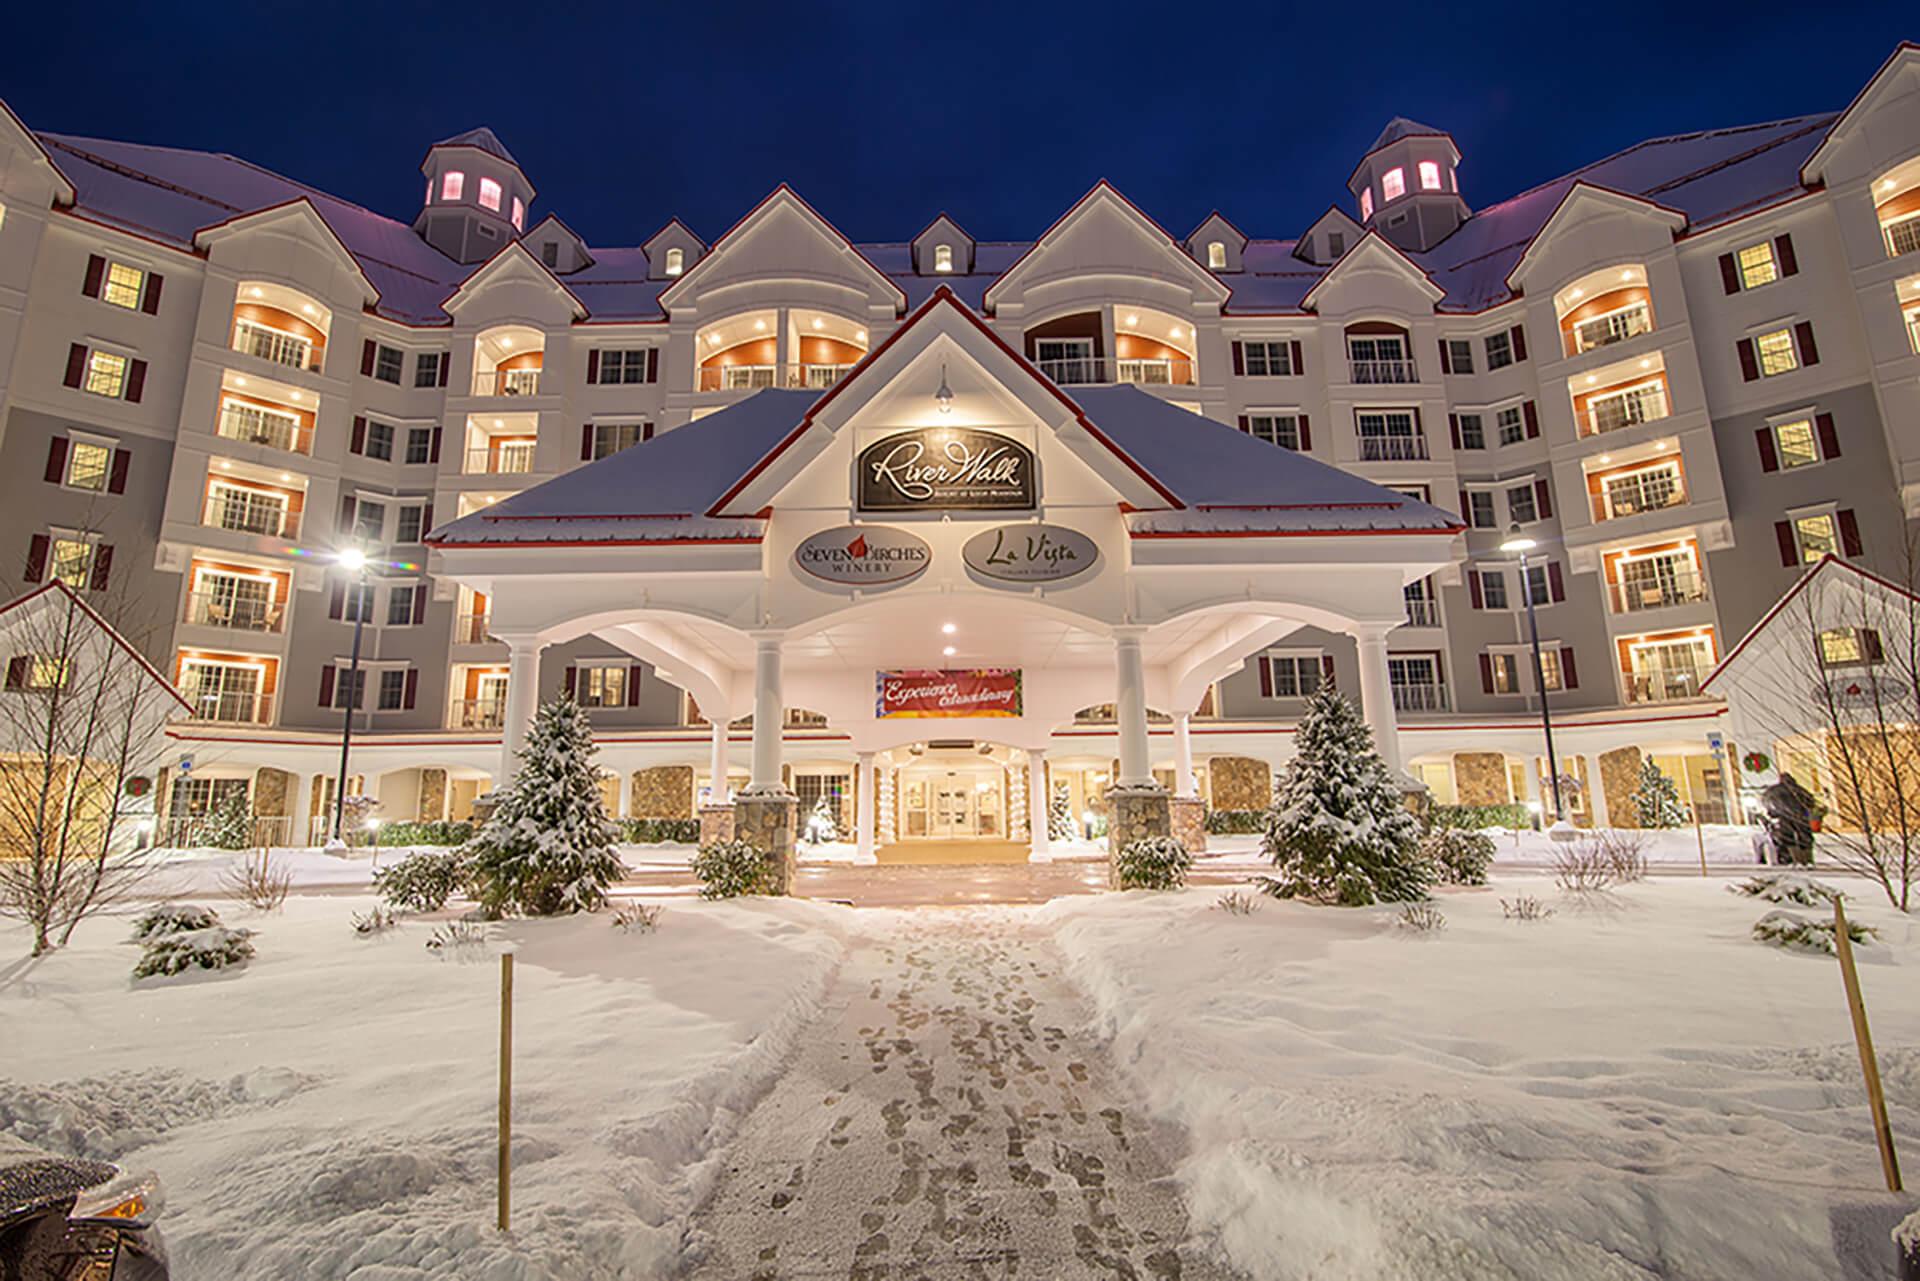 Lodging in Lincoln, NH | Loon Mountain Vacations ...